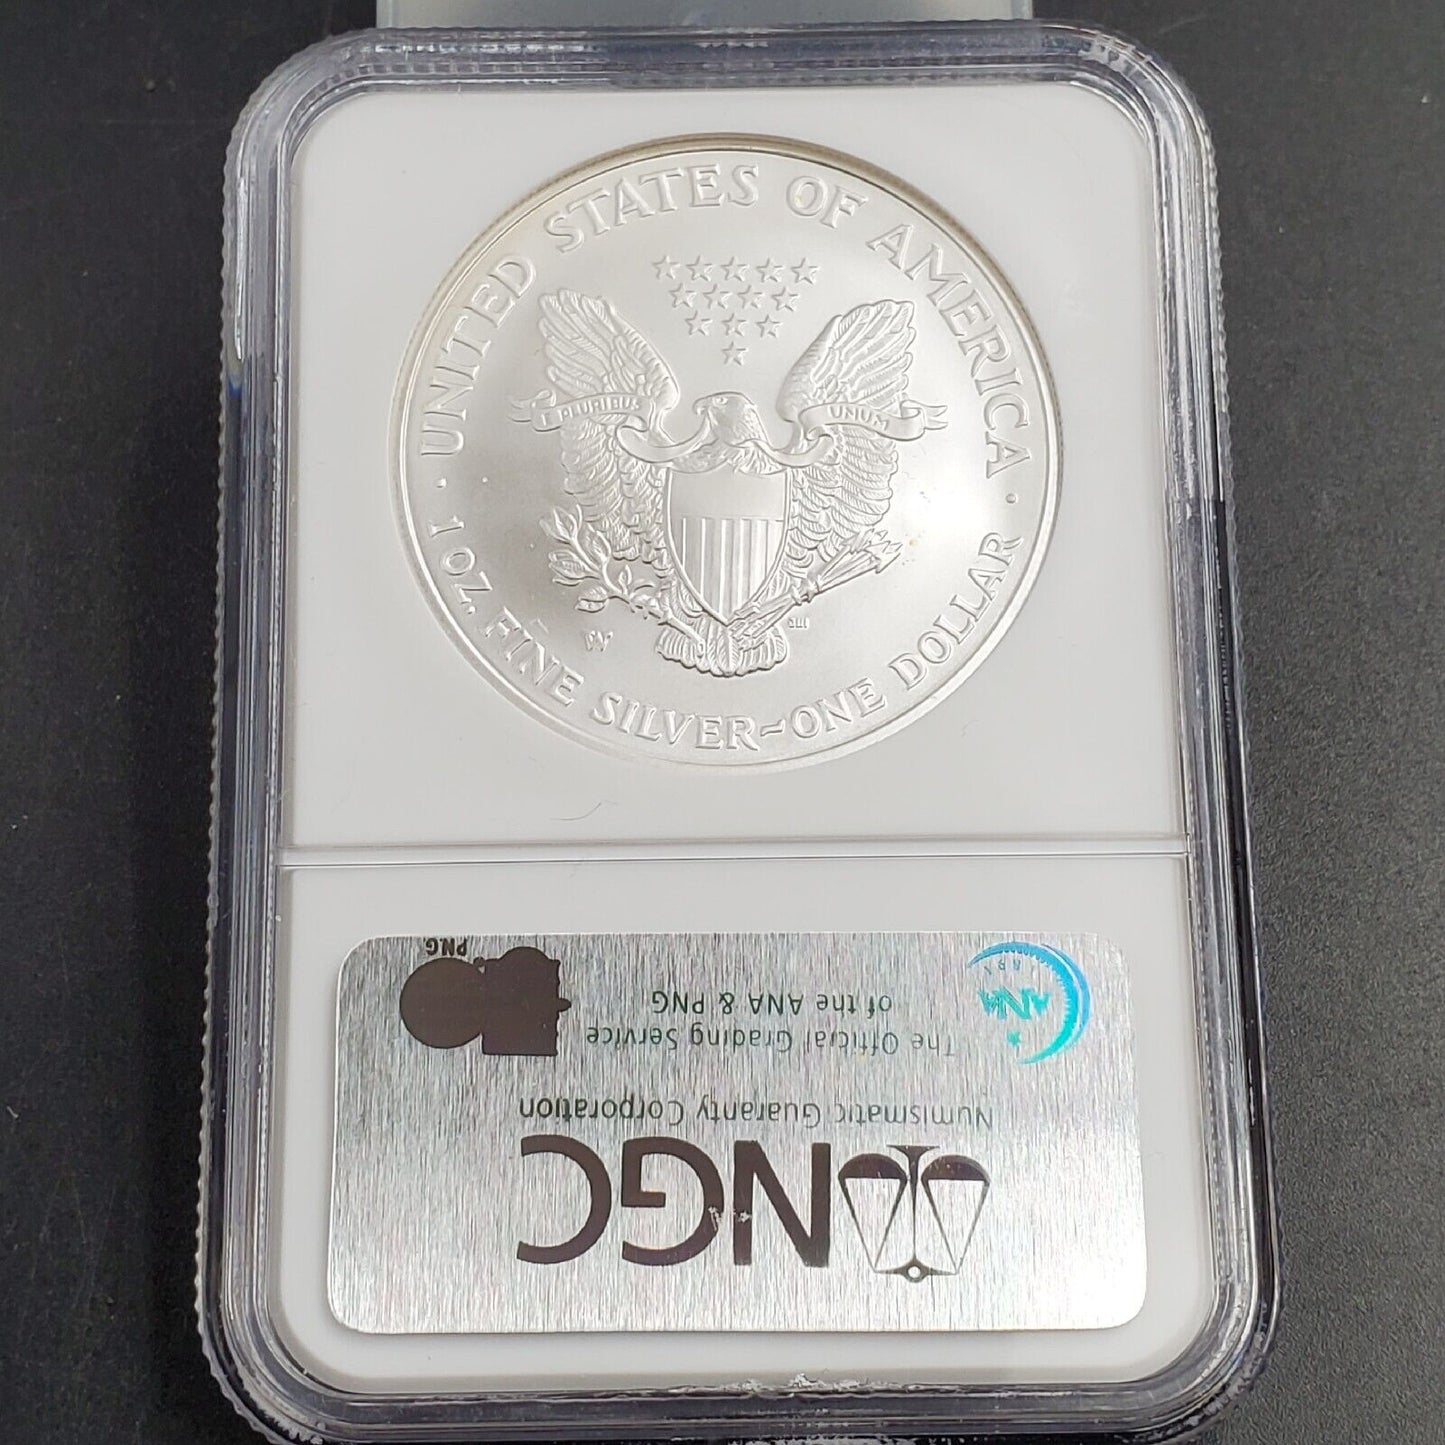 2007 W 1 OZ American 1oz .999 Silver Eagle NGC MS69 Early Releases